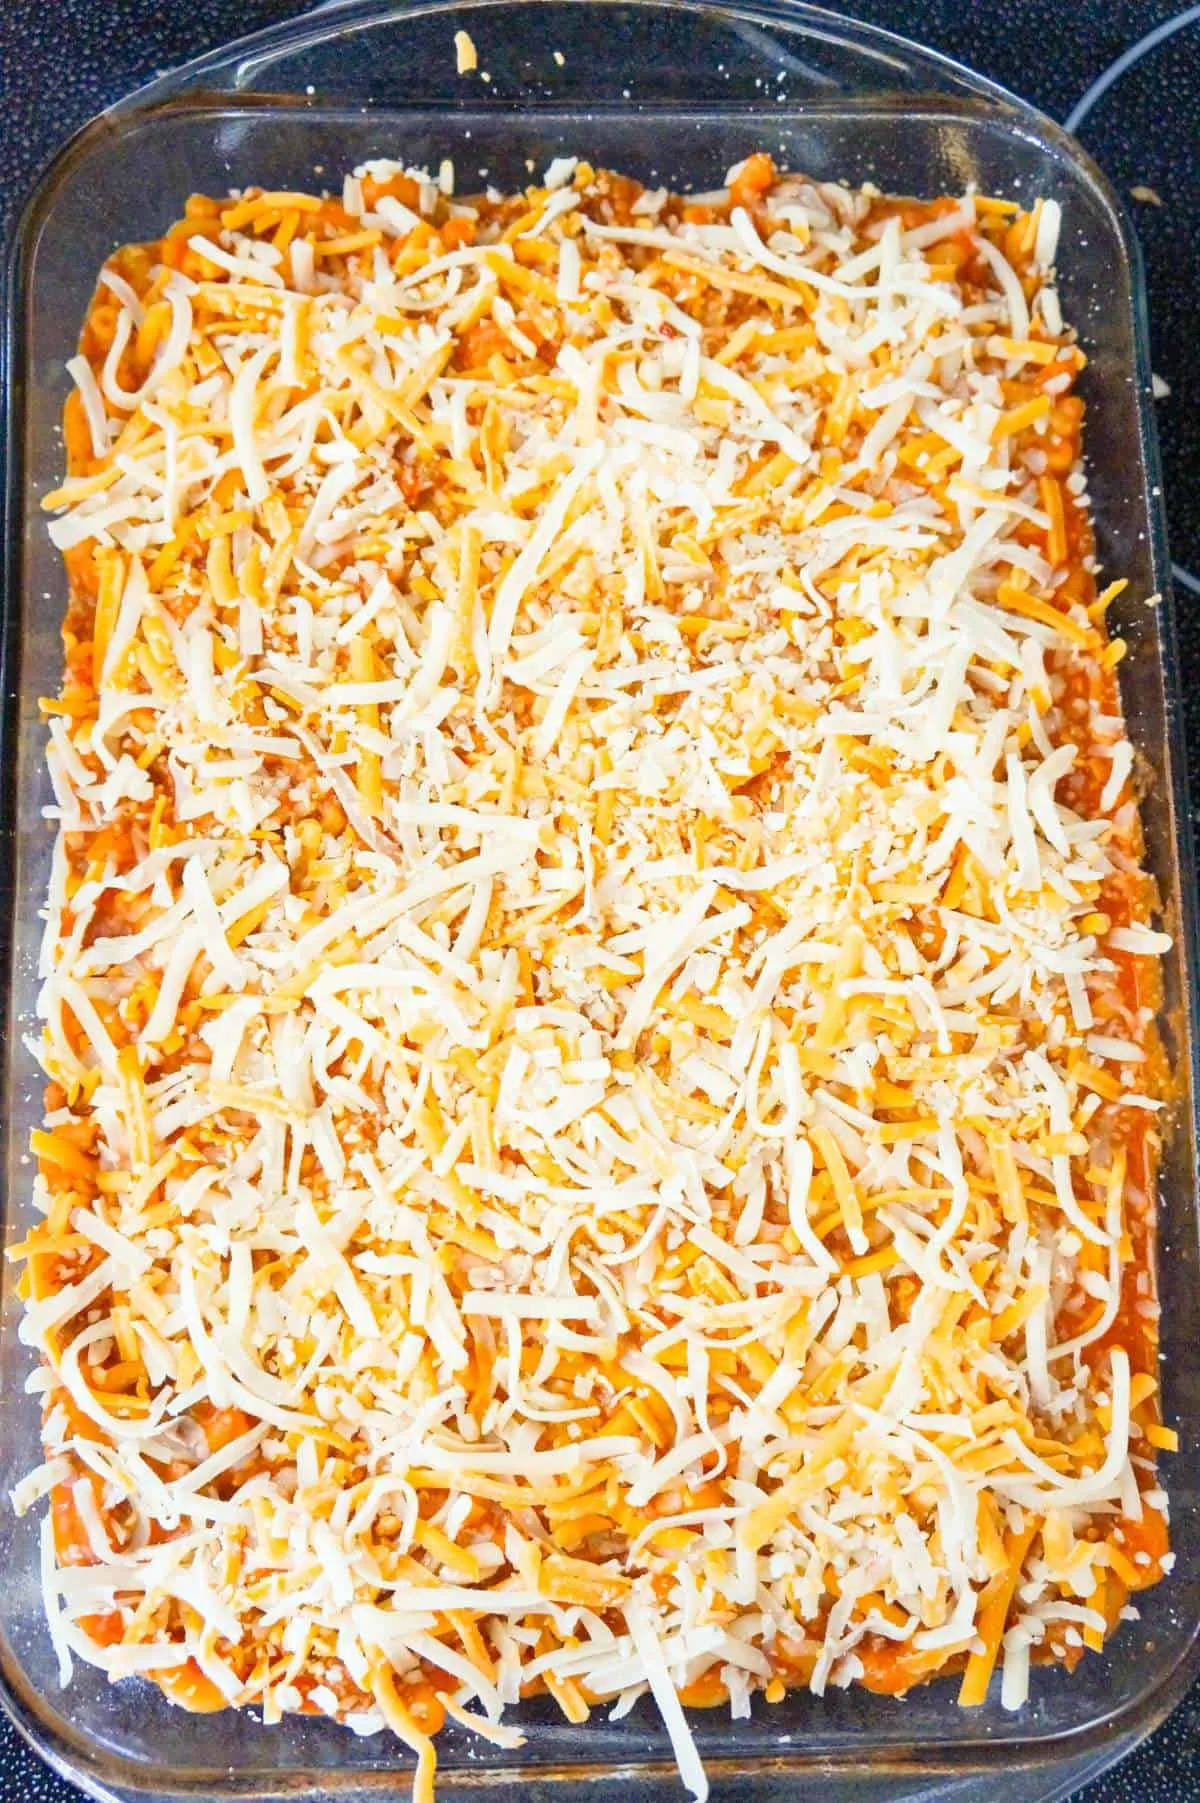 shredded cheese on top of chili mac in a baking dish